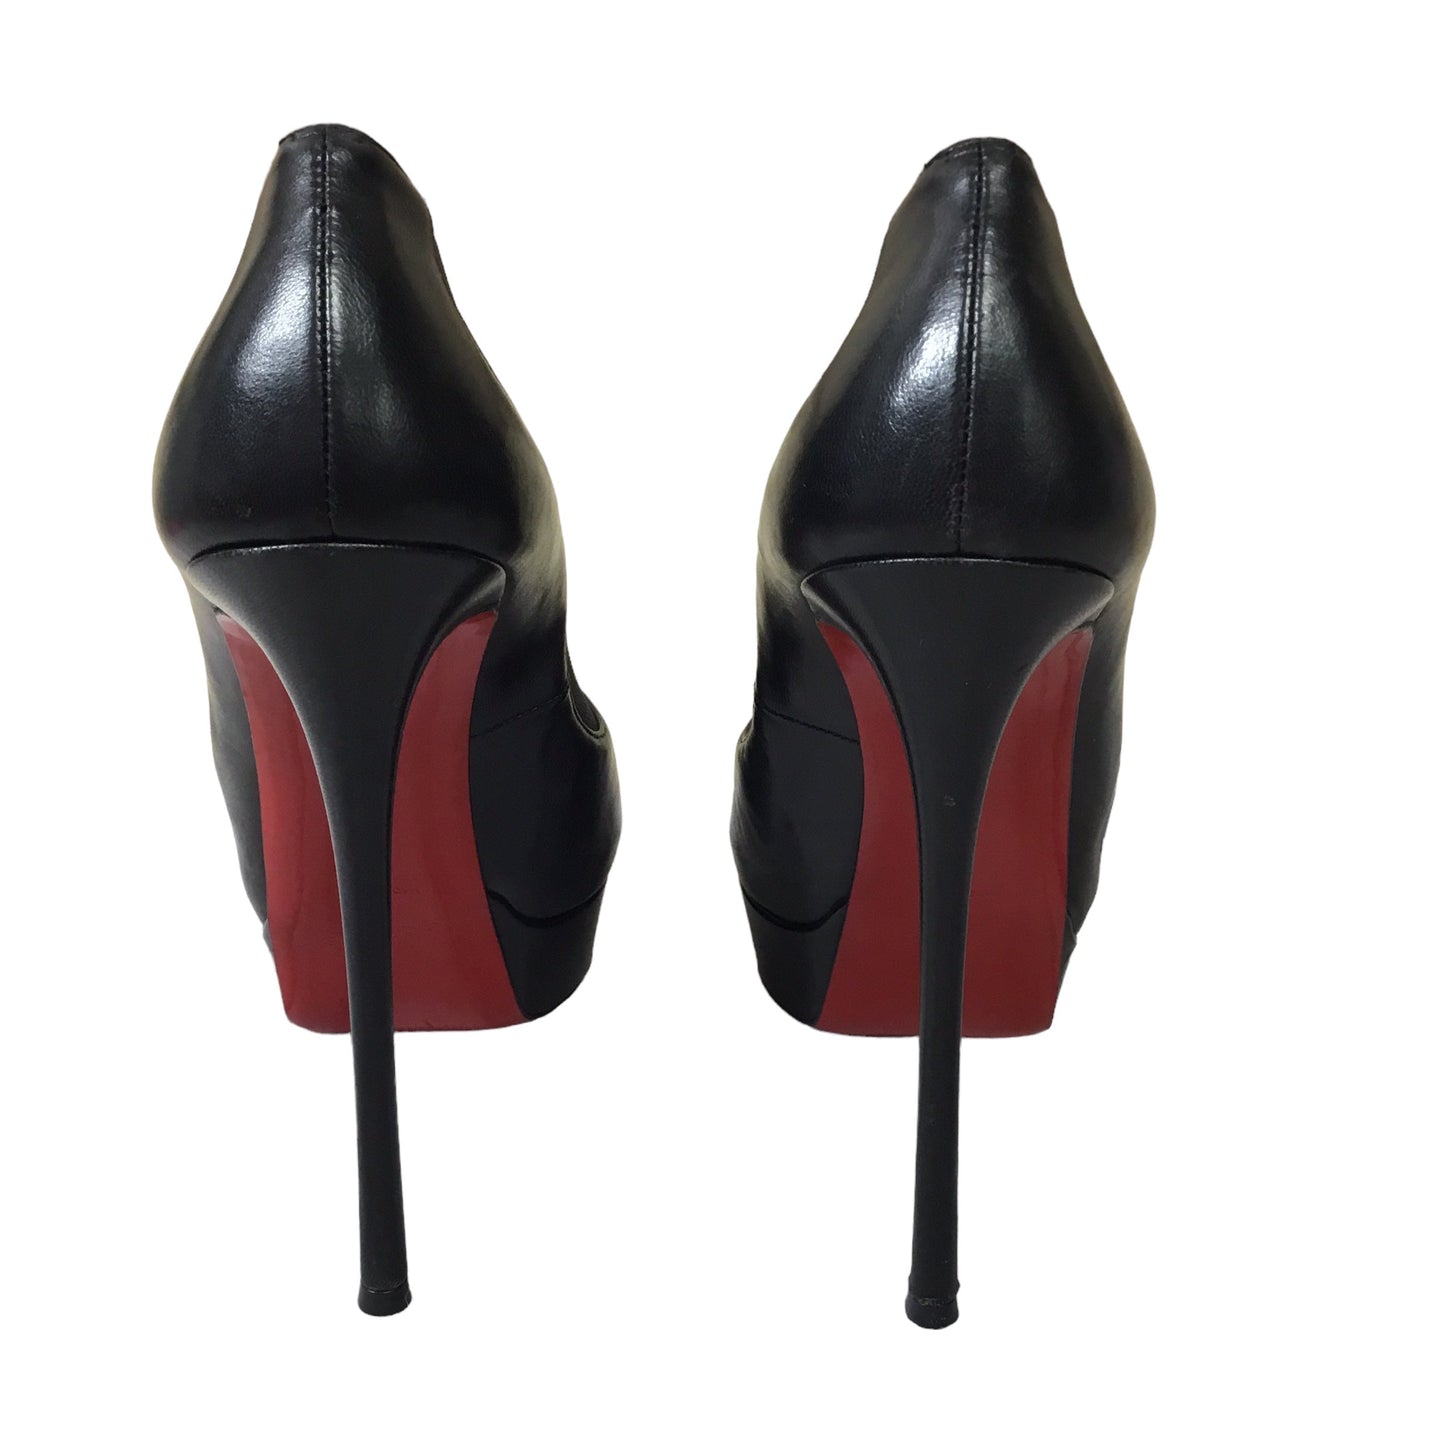 Shoes Heels Stiletto By Christian Louboutin  Size: 40